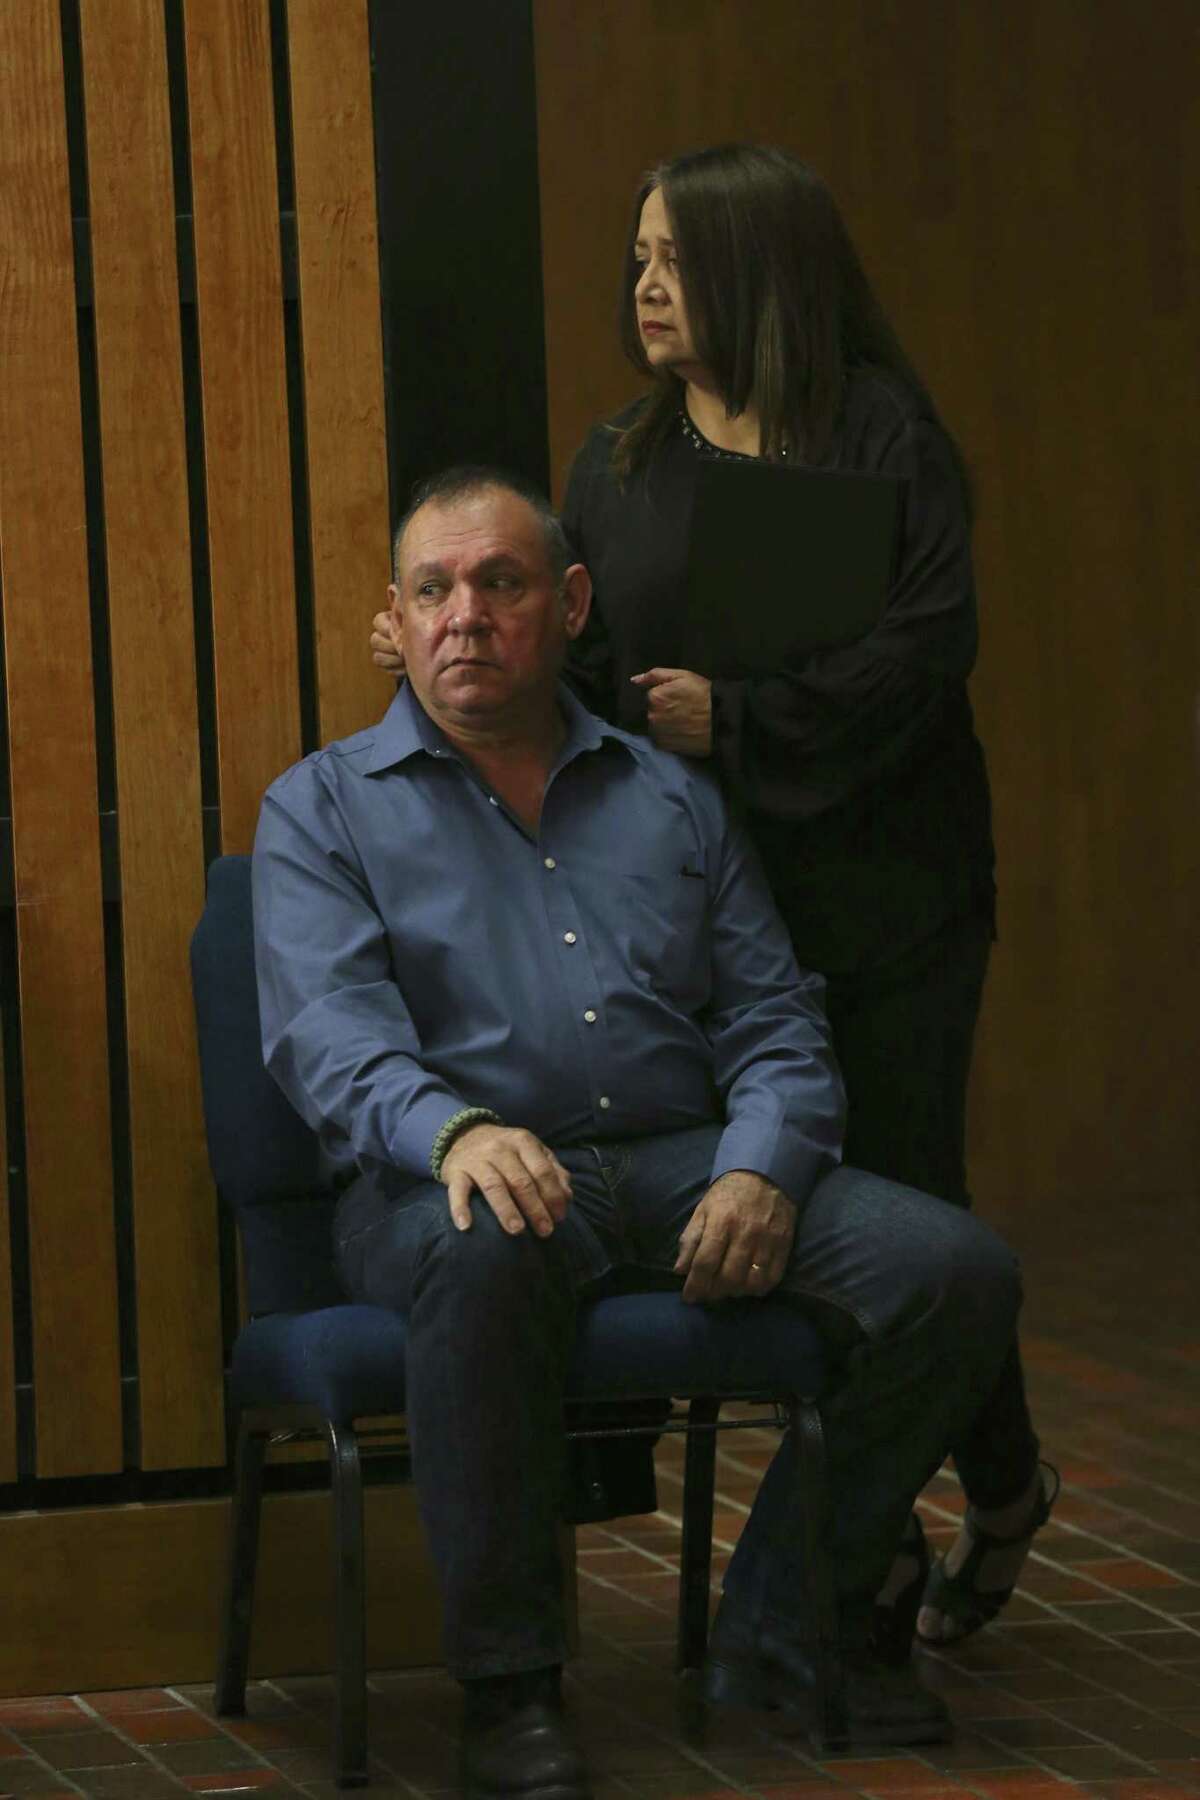 Marie and Javier Vega, Sr. wait outside the Frank Ferree Jury Room at the Cameron County Courthouse as jury selection begins in the capital murder trial of Mexican national Gustavo Tijerina-Sandoval in Brownsville, Texas, Tuesday, Feb. 13, 2018. Tijerina-Sandoval is accused of killing their son, U.S. Border Patrol agent Javier Vega, Jr., in August of 2014. Vega was fishing with his family in Santa Monica, a secluded area near Harlingen, when two men attempted to rob the group. Vega pulled out his weapon and was shot in the chest. He died en route to the hospital. Tijerina-Sandoval and Ismael Hernandez-Vallejo are both charged in Vega's death, but their trials will be held separately. The elder Vega was also shot in the incident.